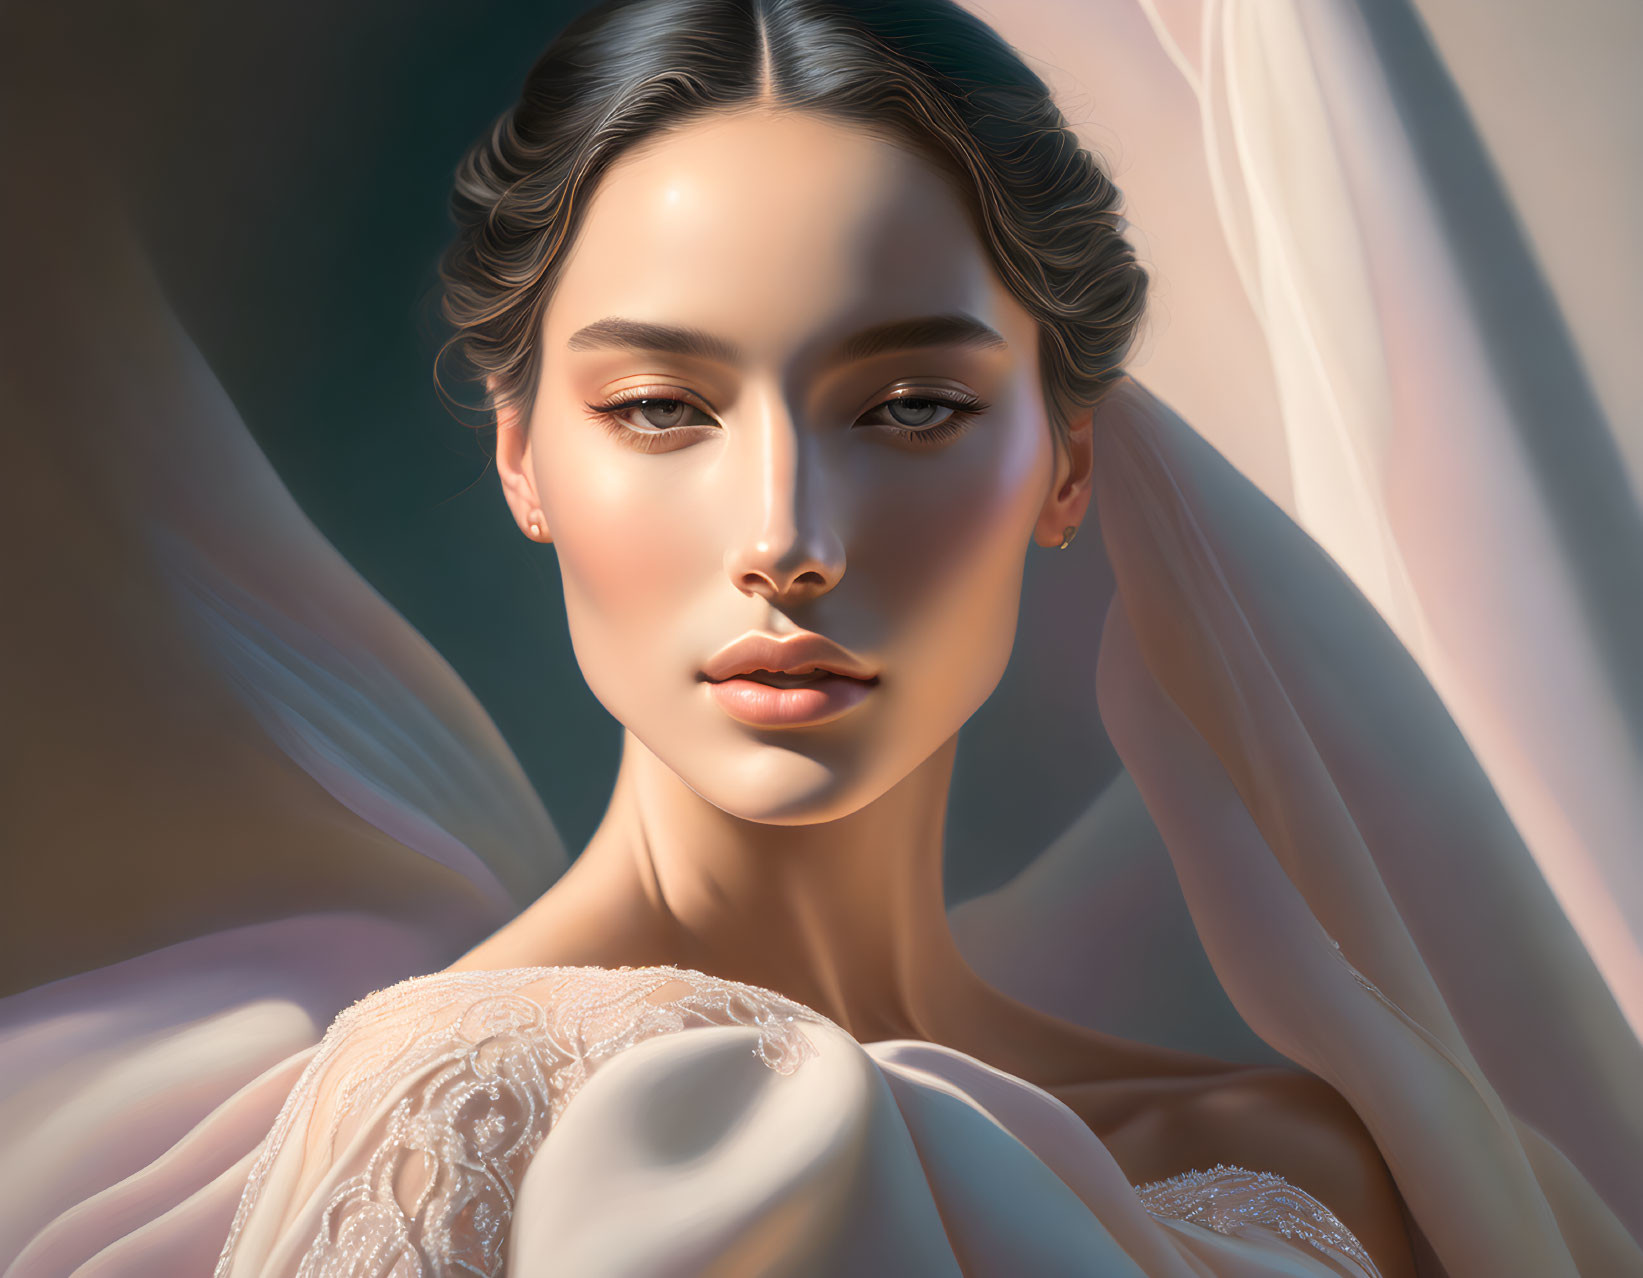 Detailed digital artwork of woman with serene expression, flowing veil, and delicate lace garment in soft lighting